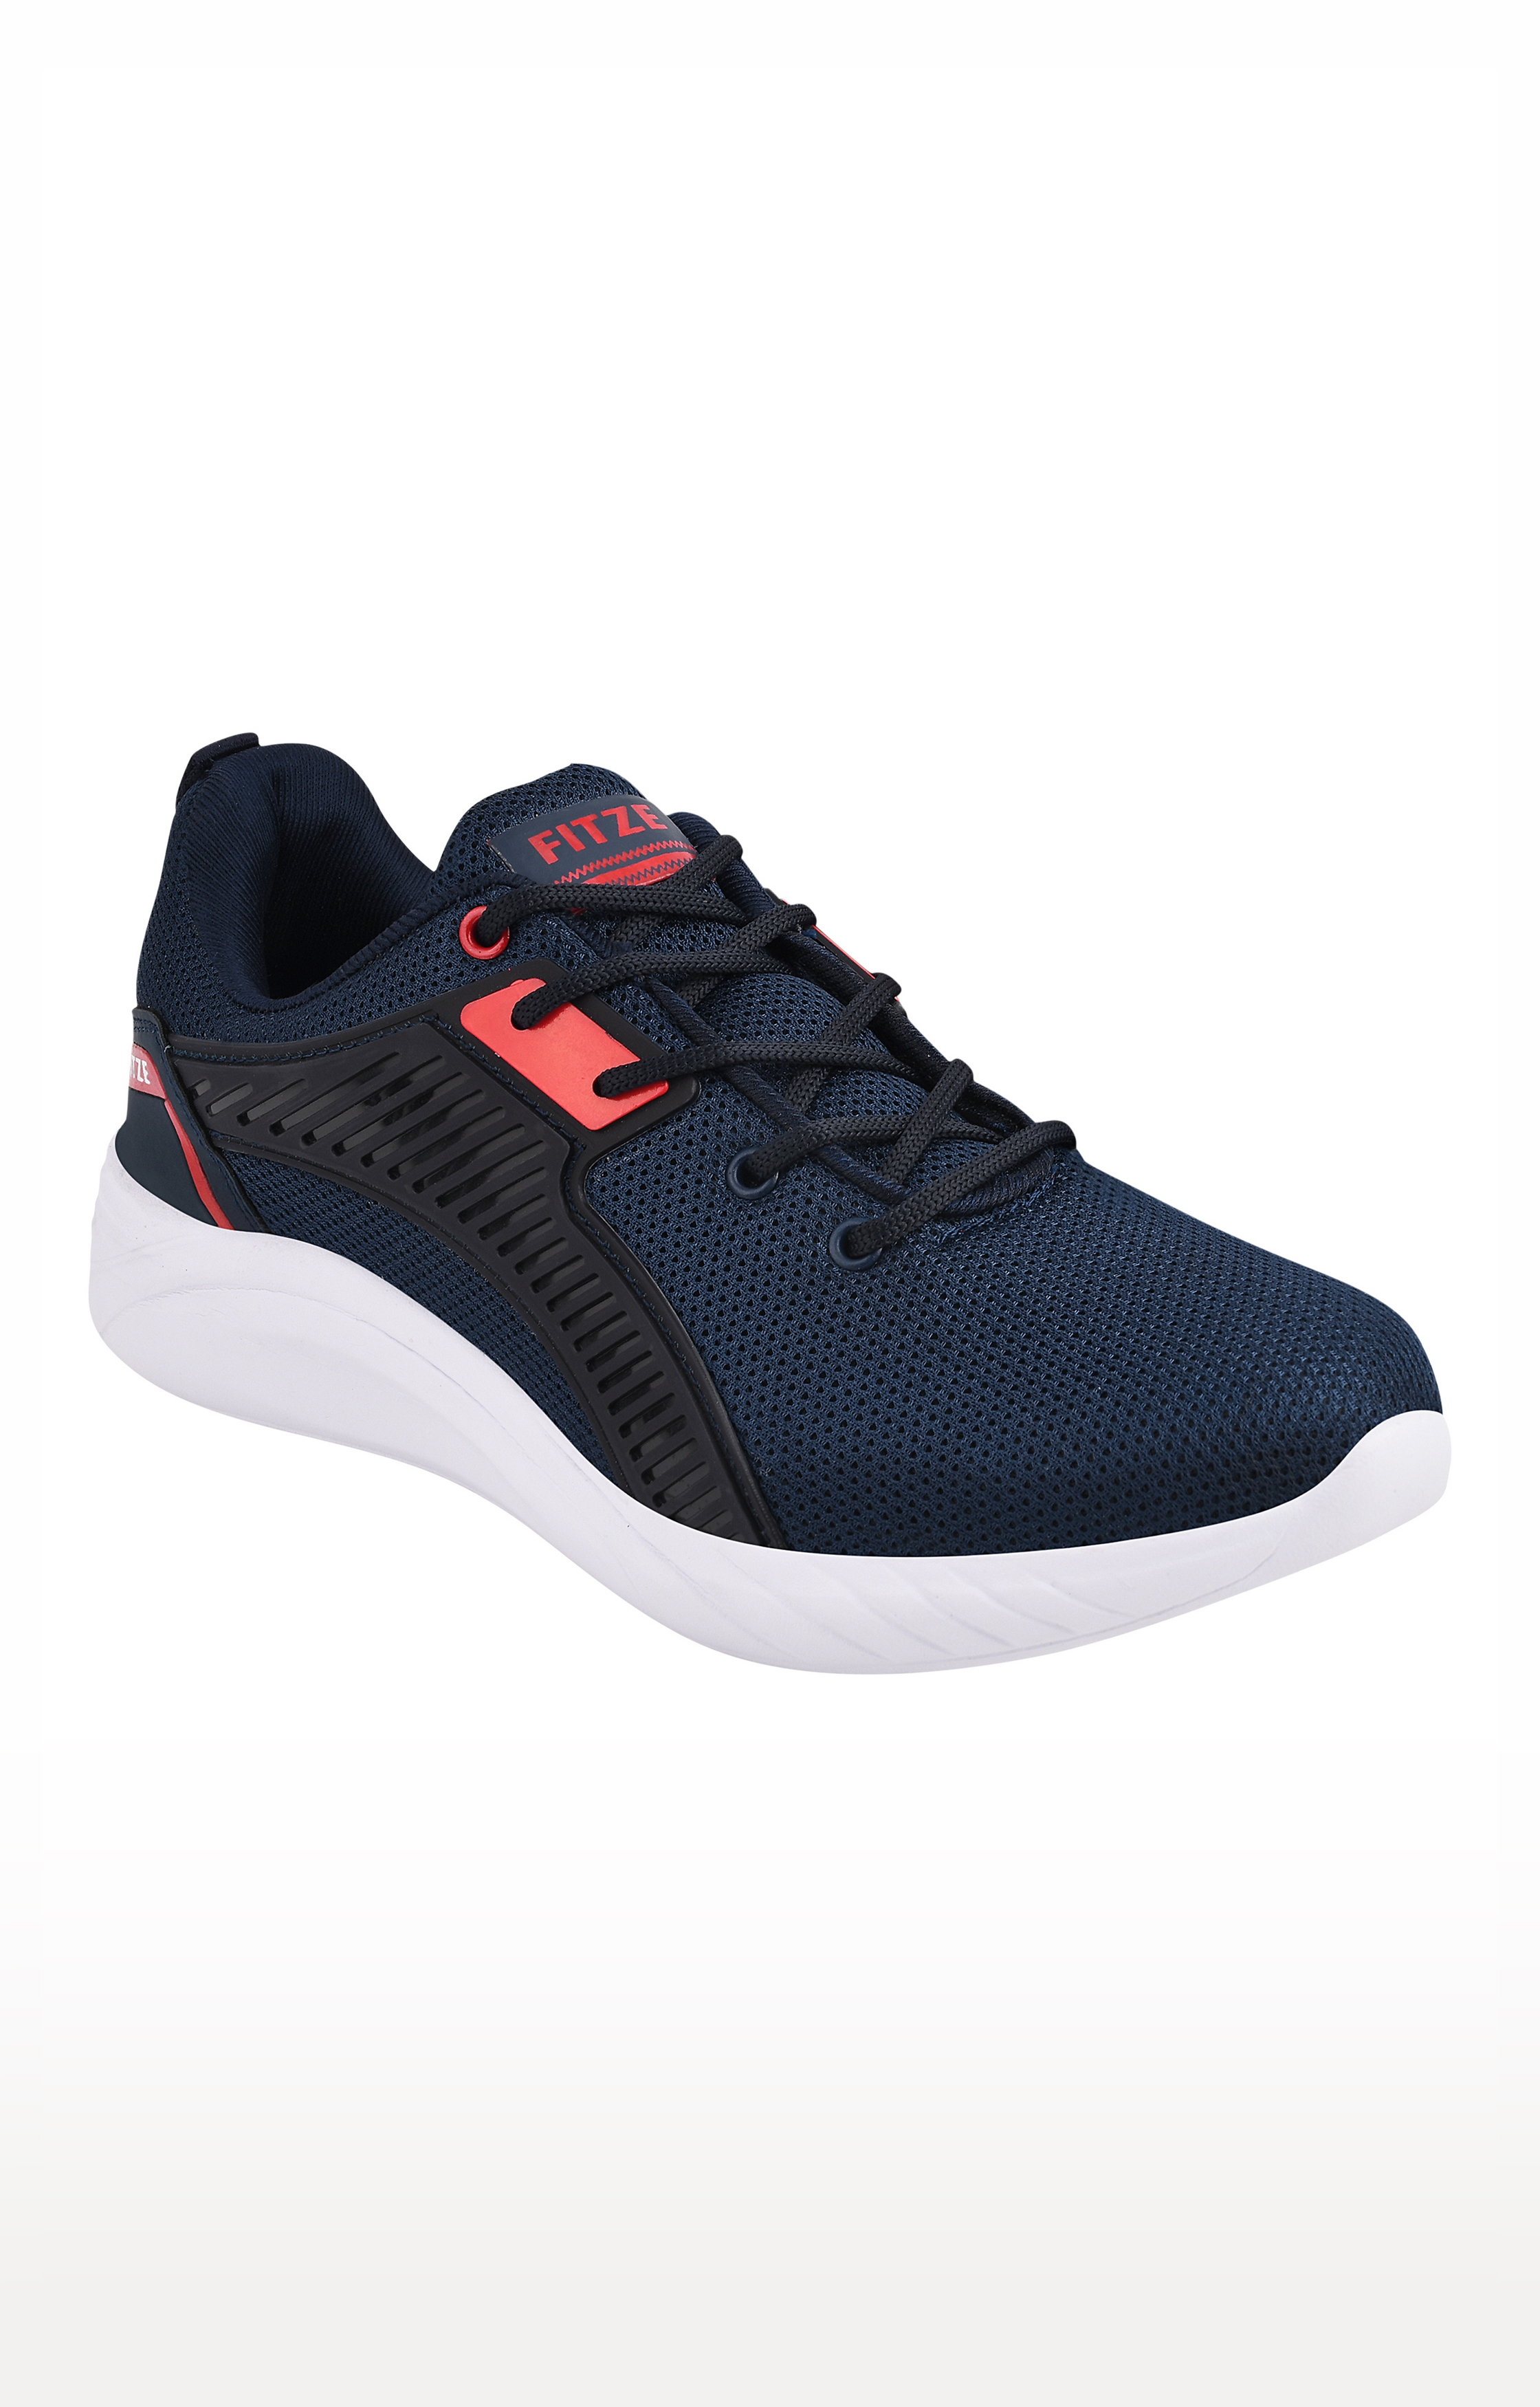 Blue Running Shoes (FLC_19_NAVY_RED)